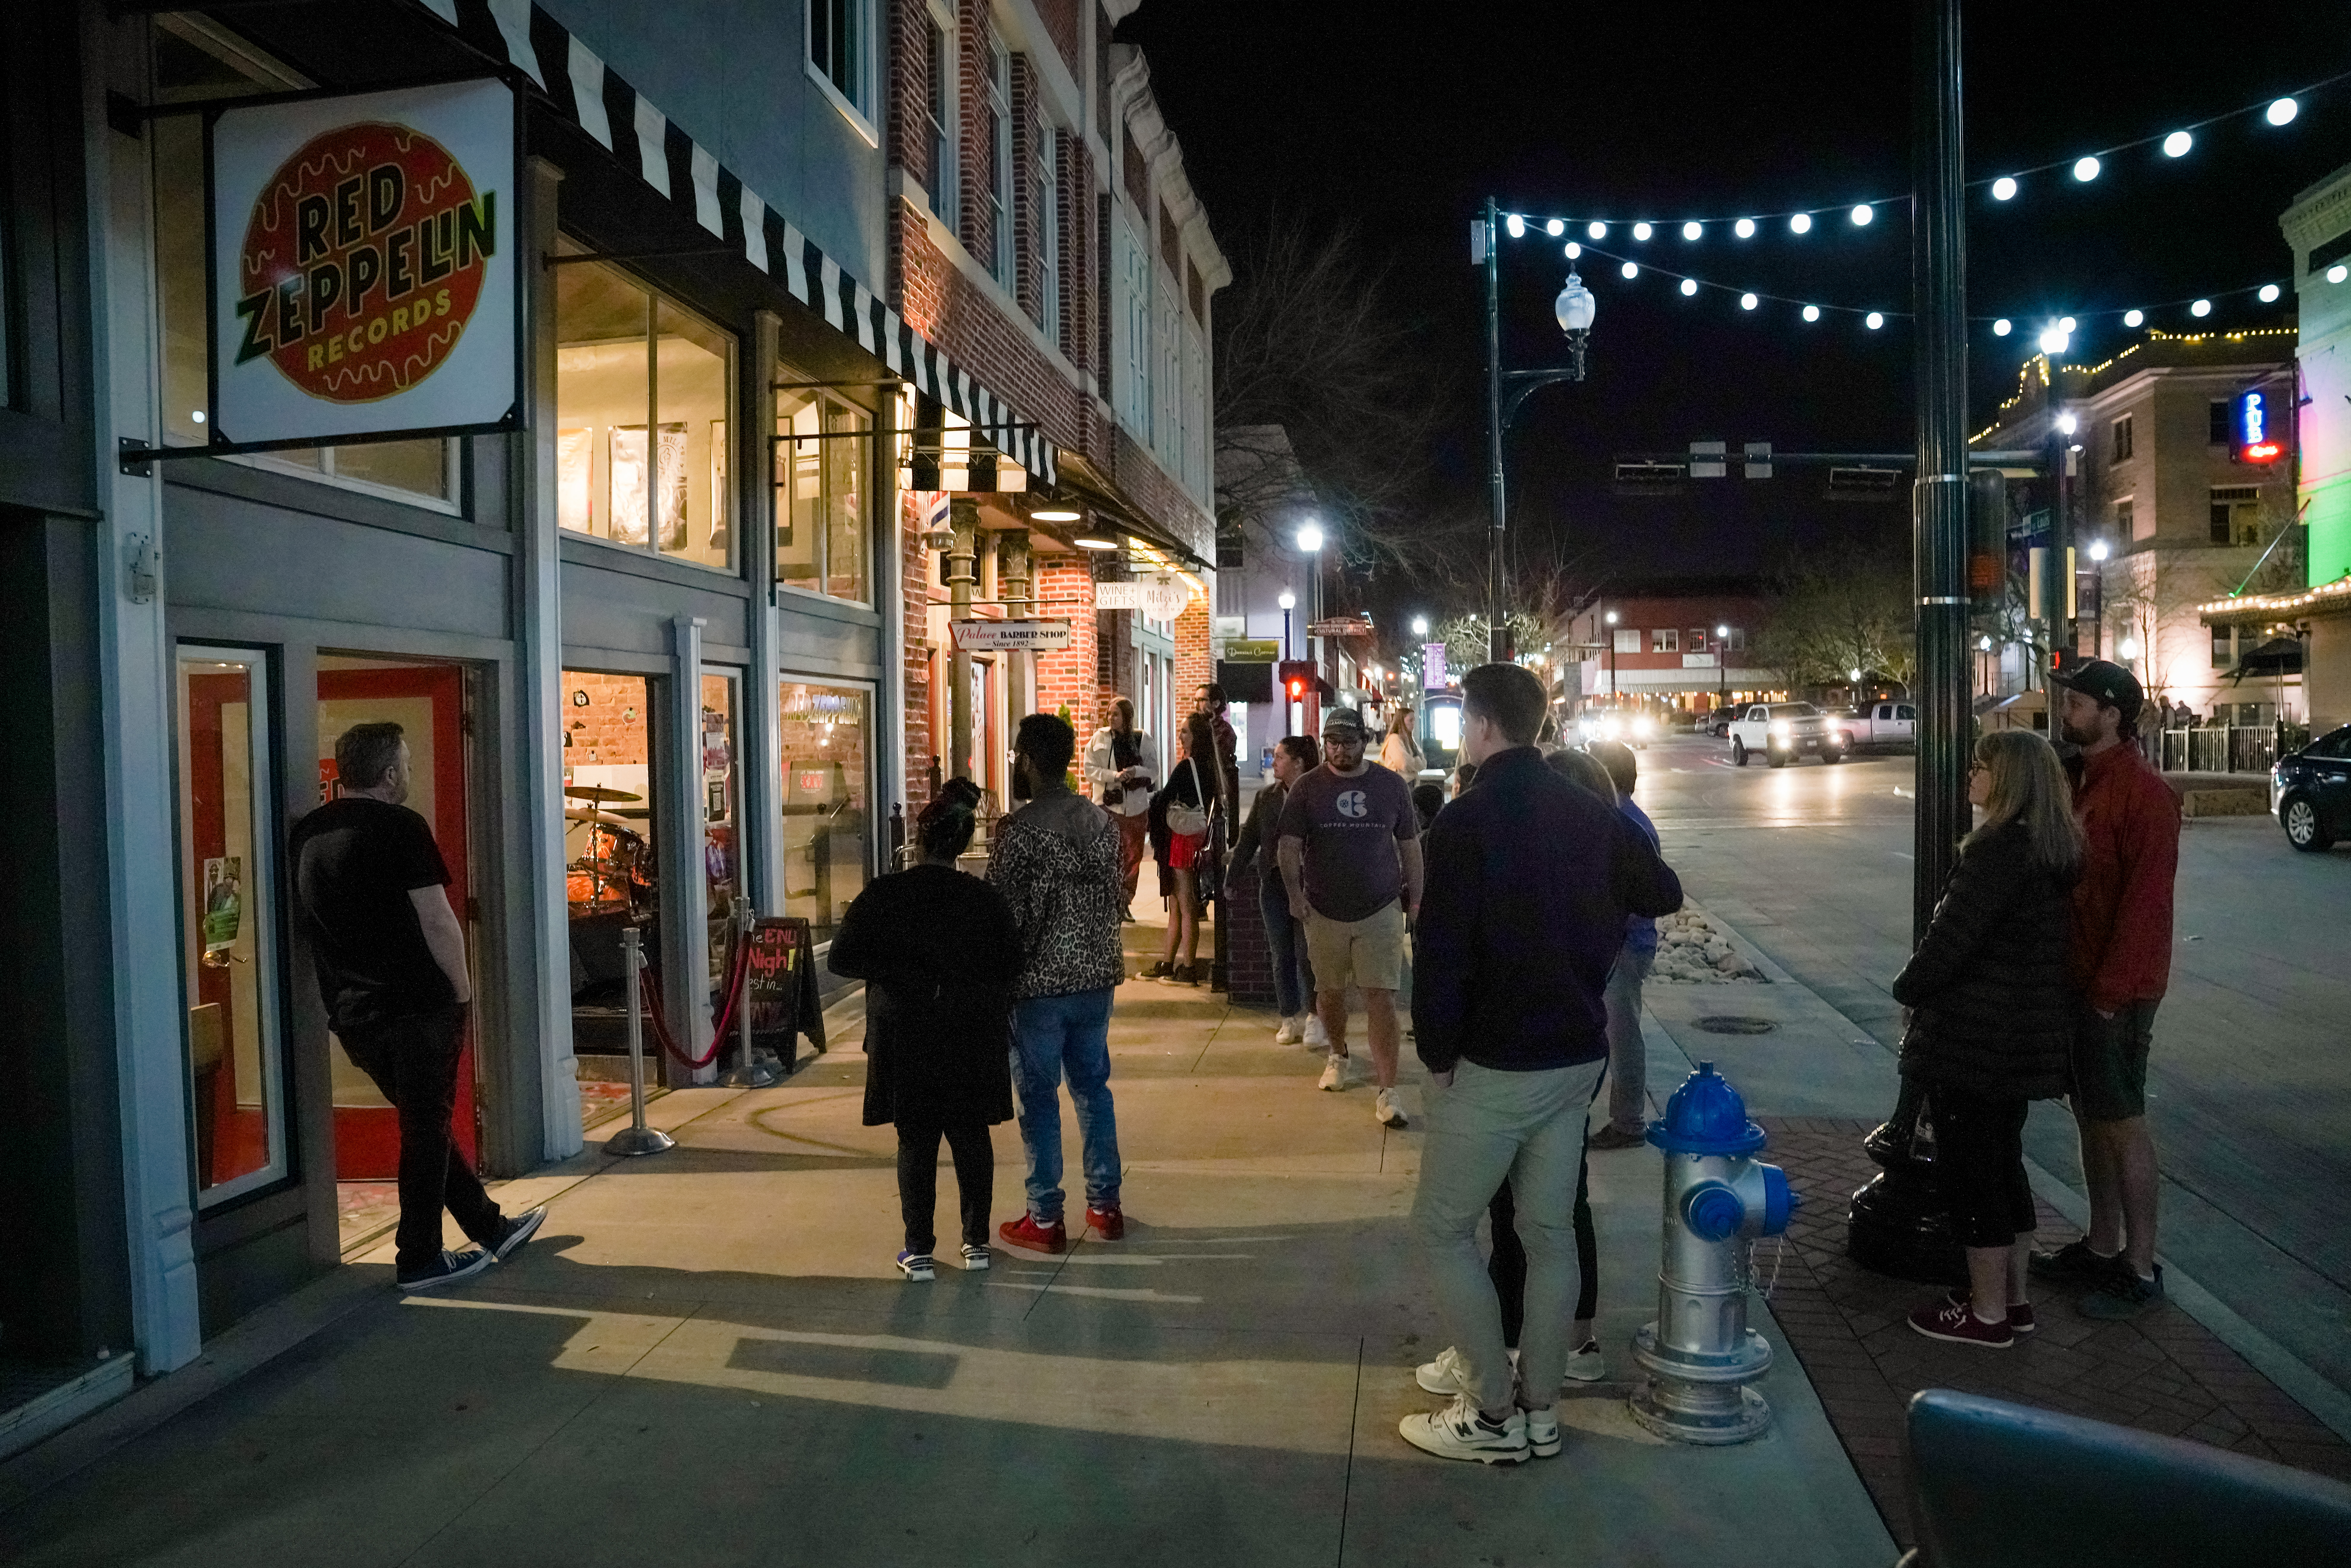 People gathered on the sidewalk outside a record store